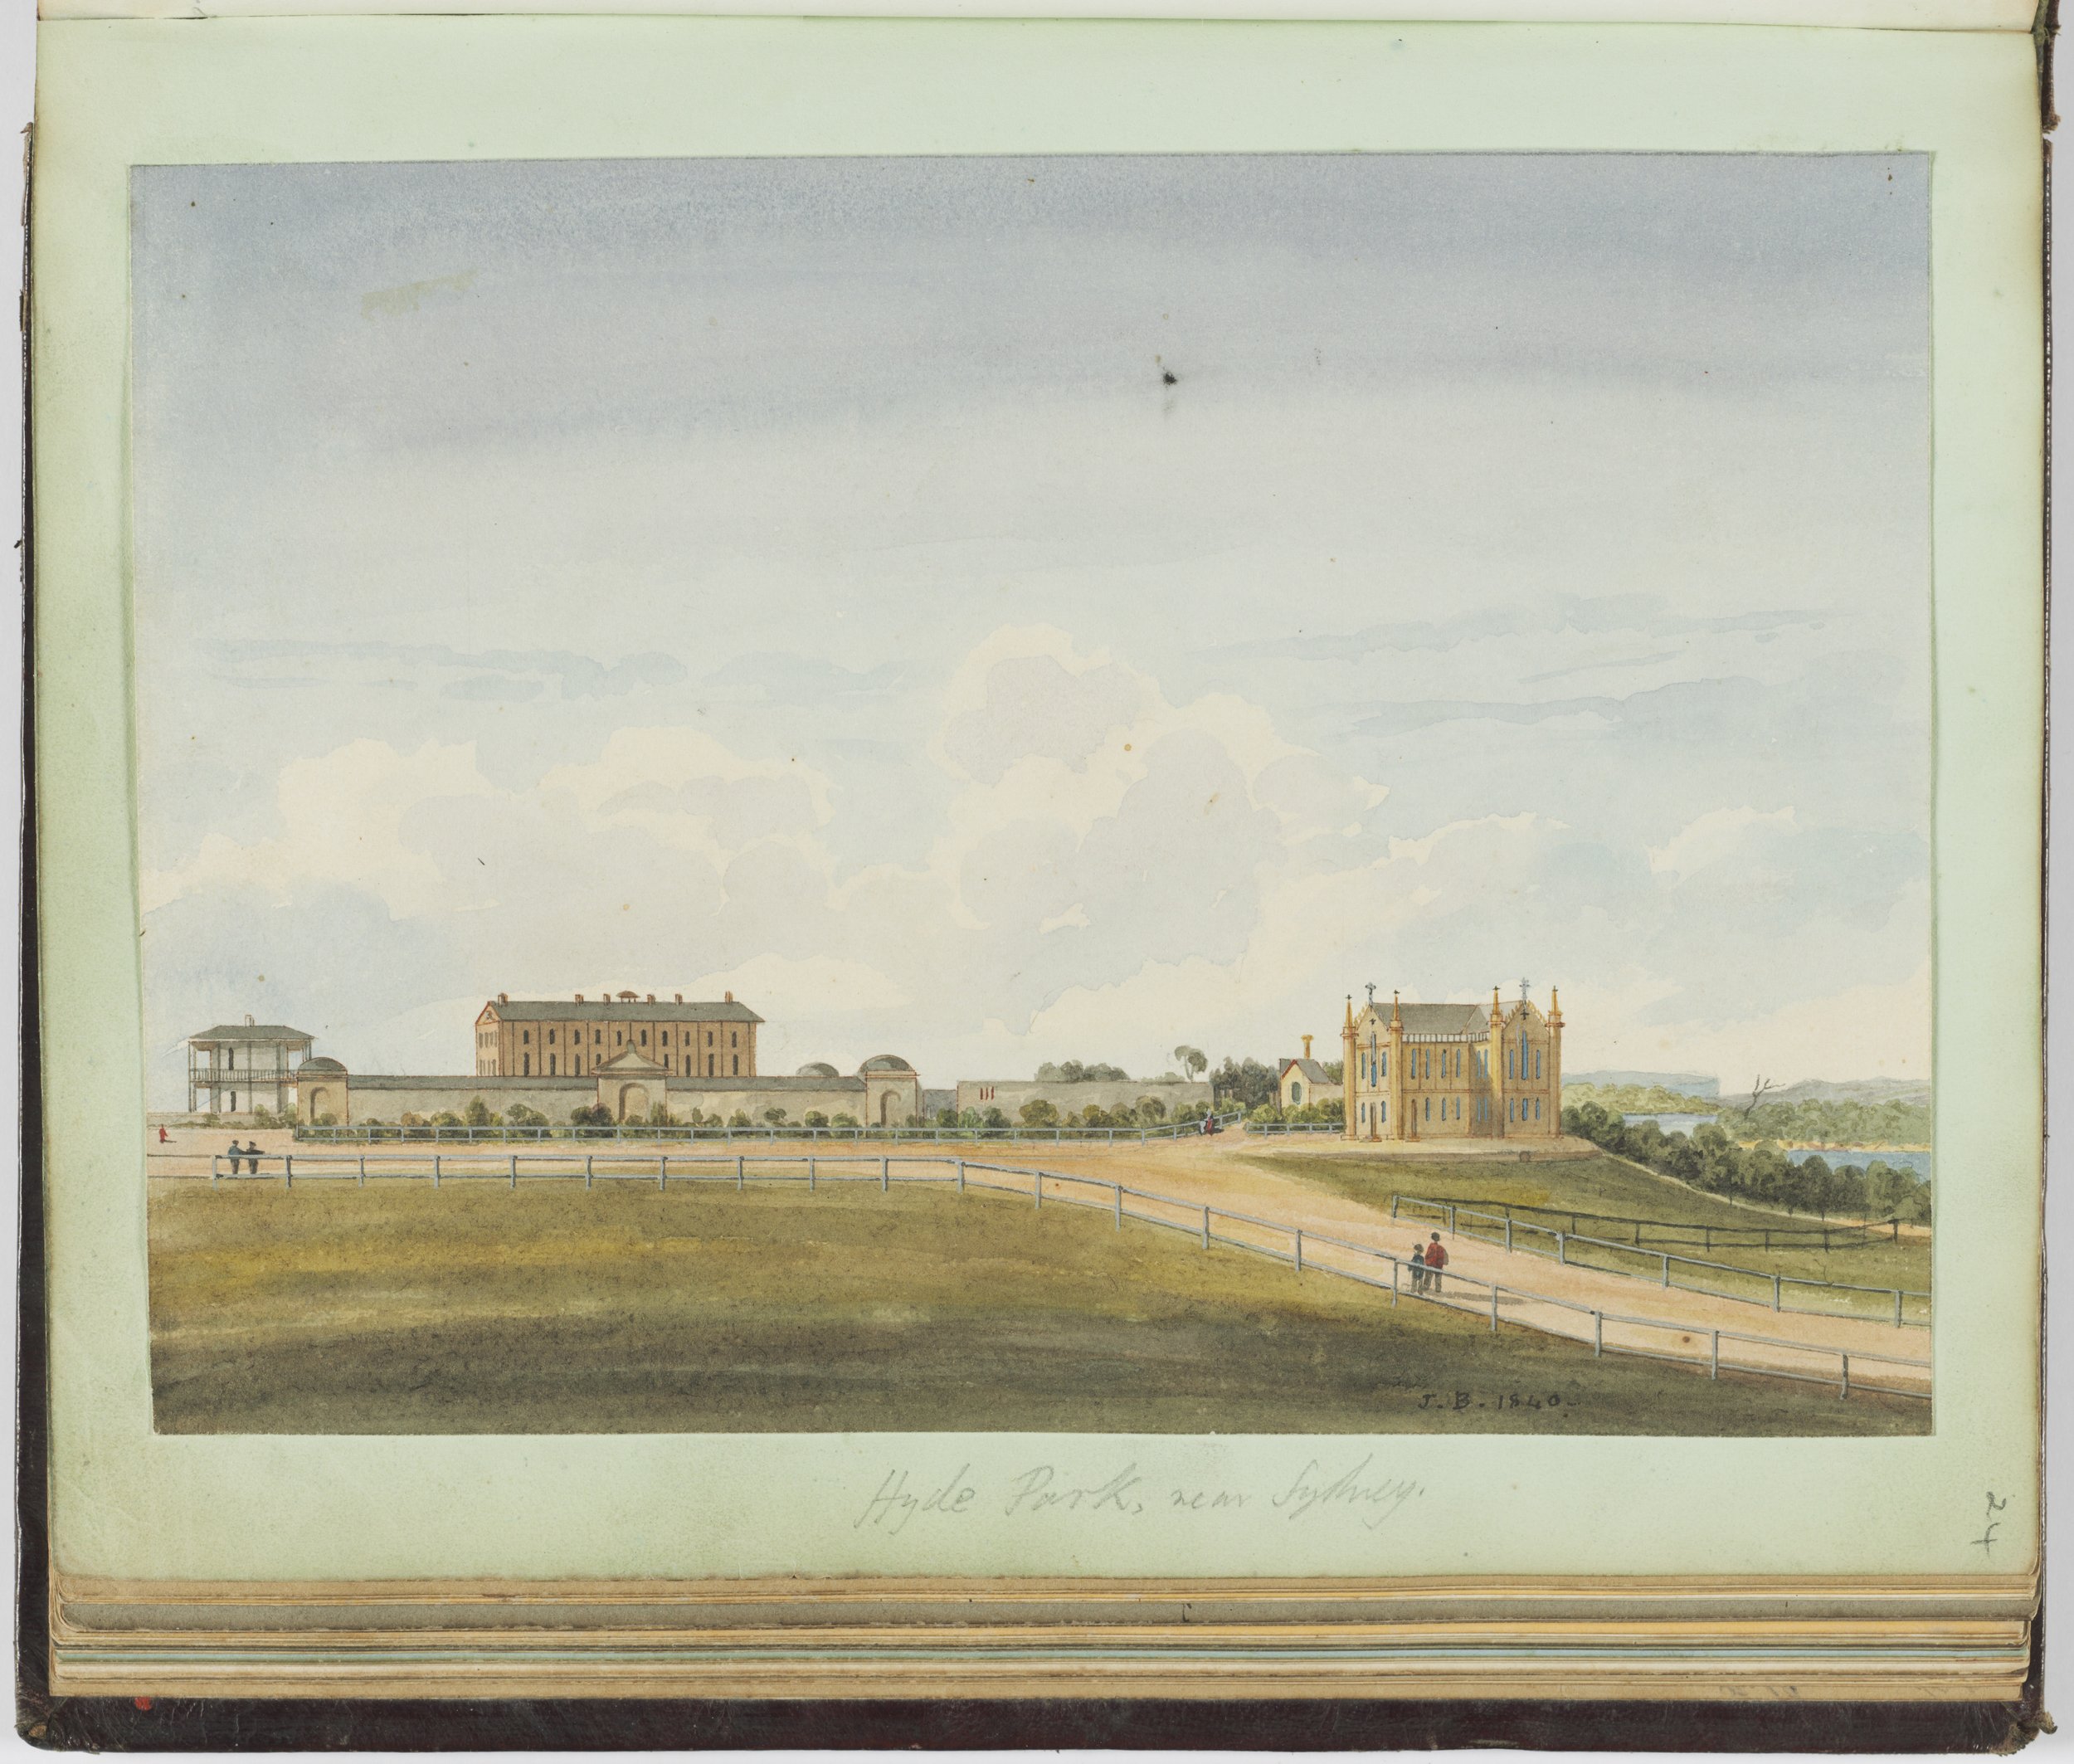  Hyde Park, near Sydney. Watercolour drawing depicting from left to right Sydney Hospital, Hyde Park Barracks, St Mary's Cathedral, with glimpse of harbour, initialled "J.B. 1840." Compiled by Richard Jones. Mitchell Library, State Library of New Sou